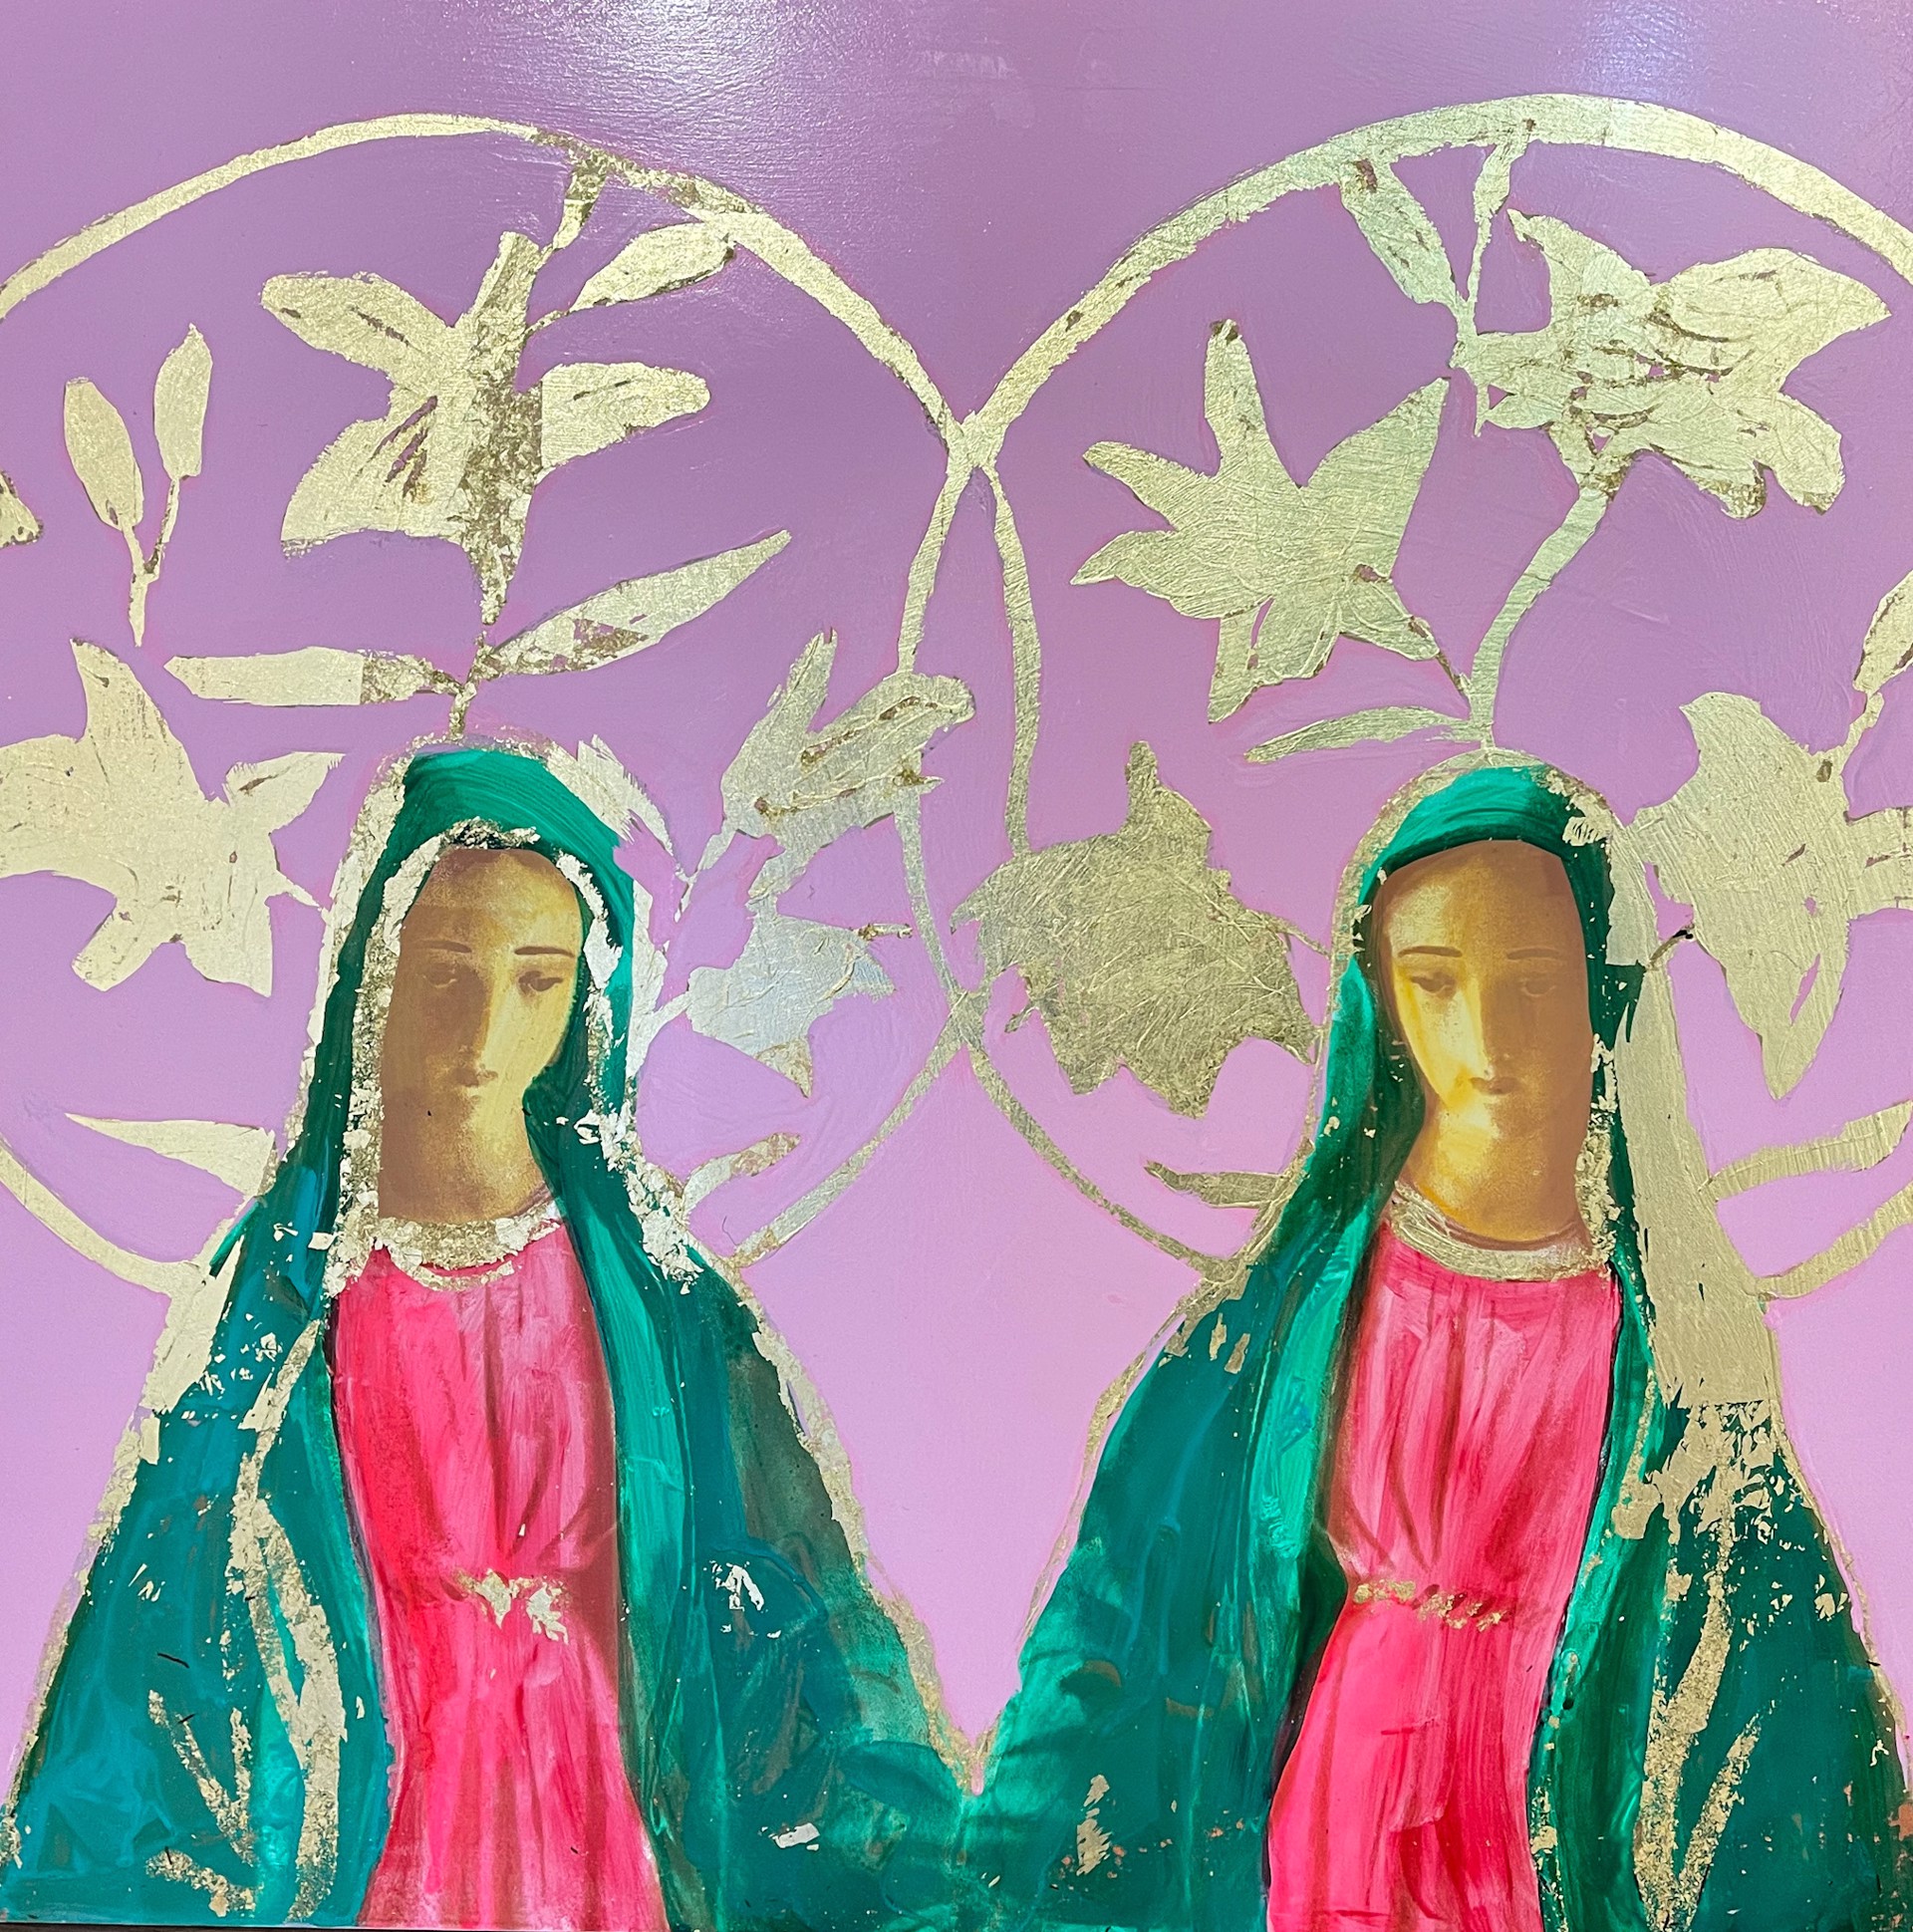 Mirrored Hail Mary in Pink and Green by Megan Coonelly